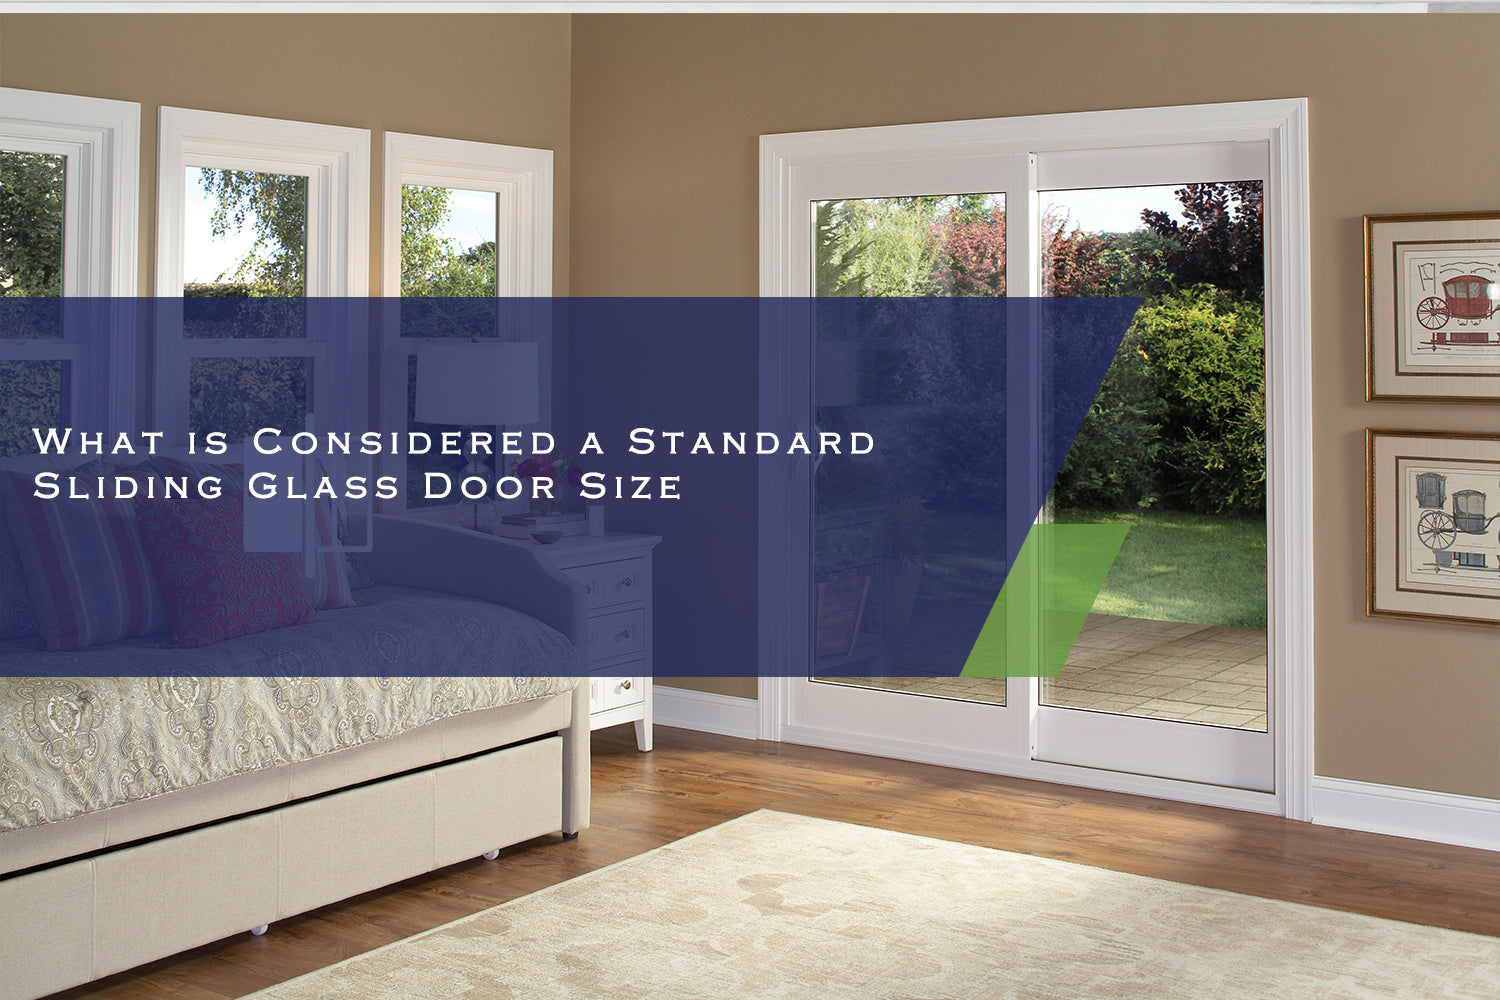 What is Considered a Standard Sliding Glass Door Size?